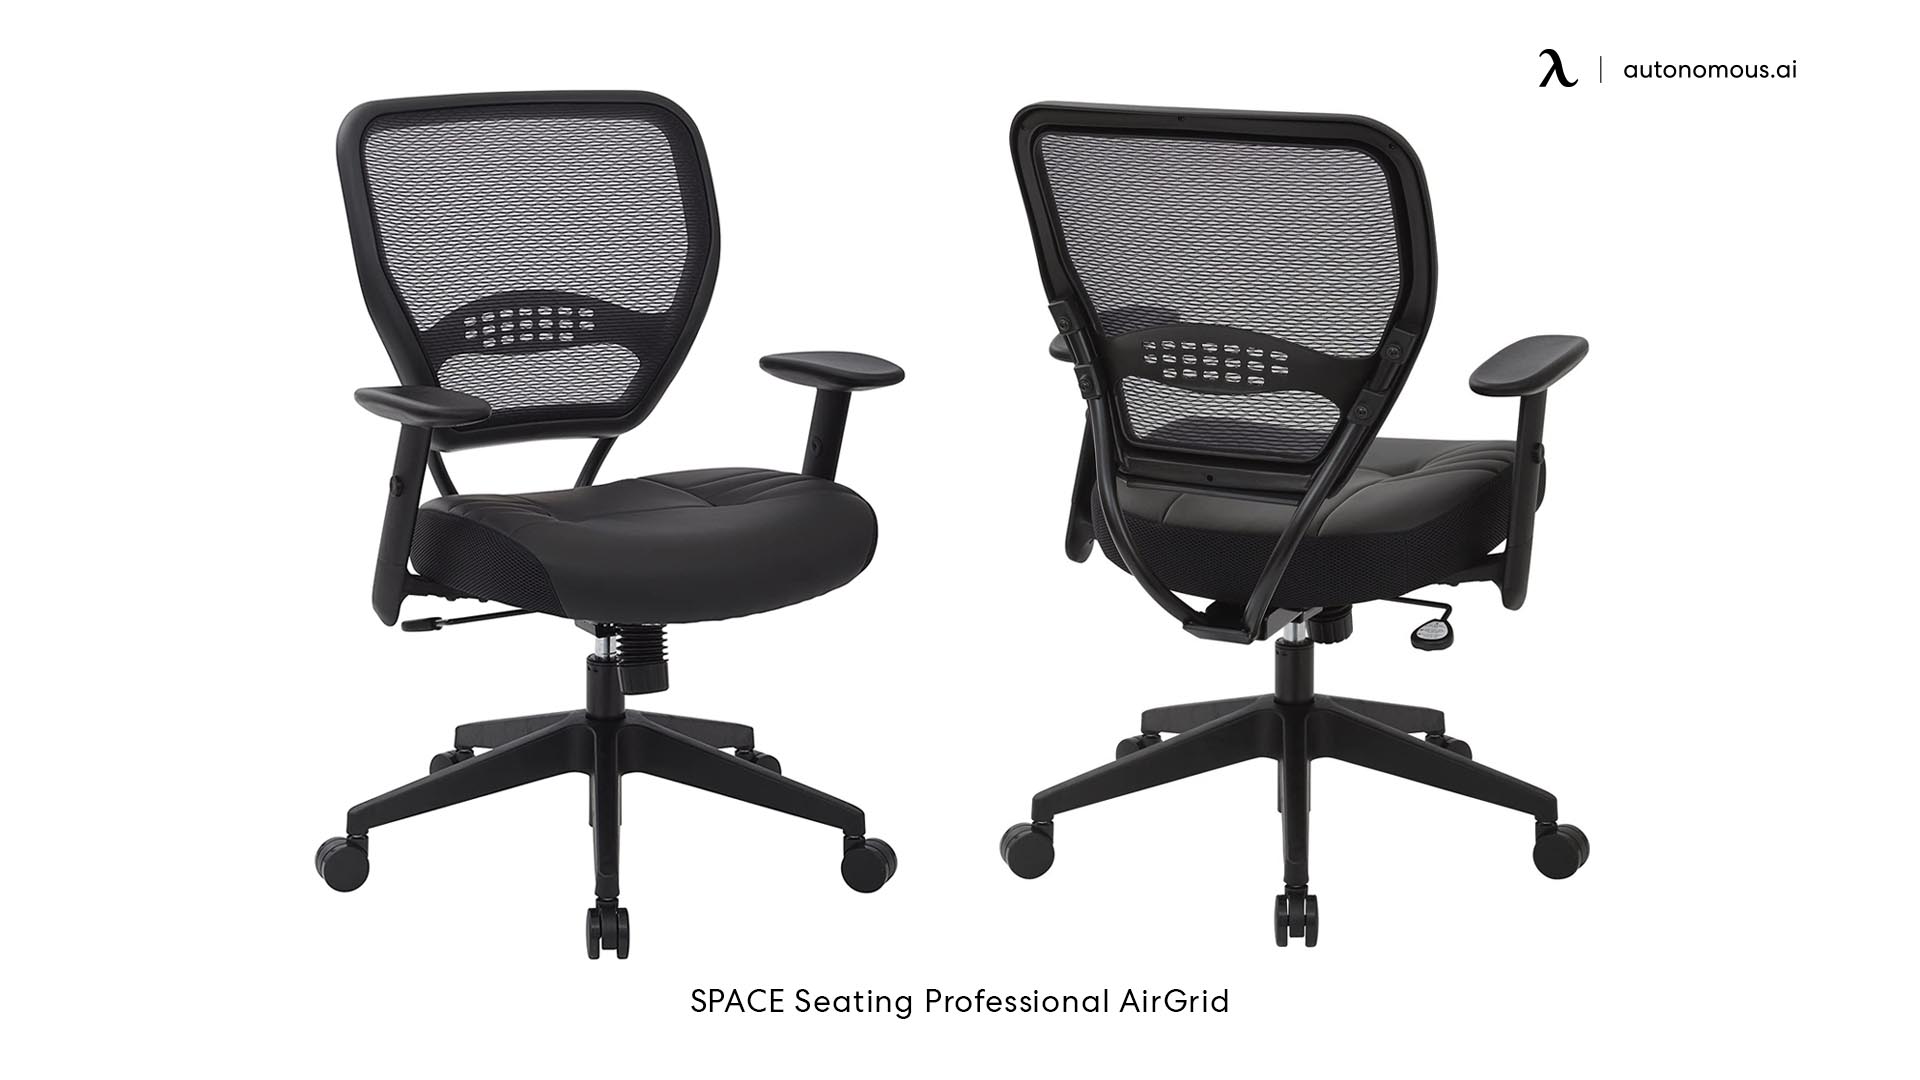 Professional Air Grid 5700E by Space Seating